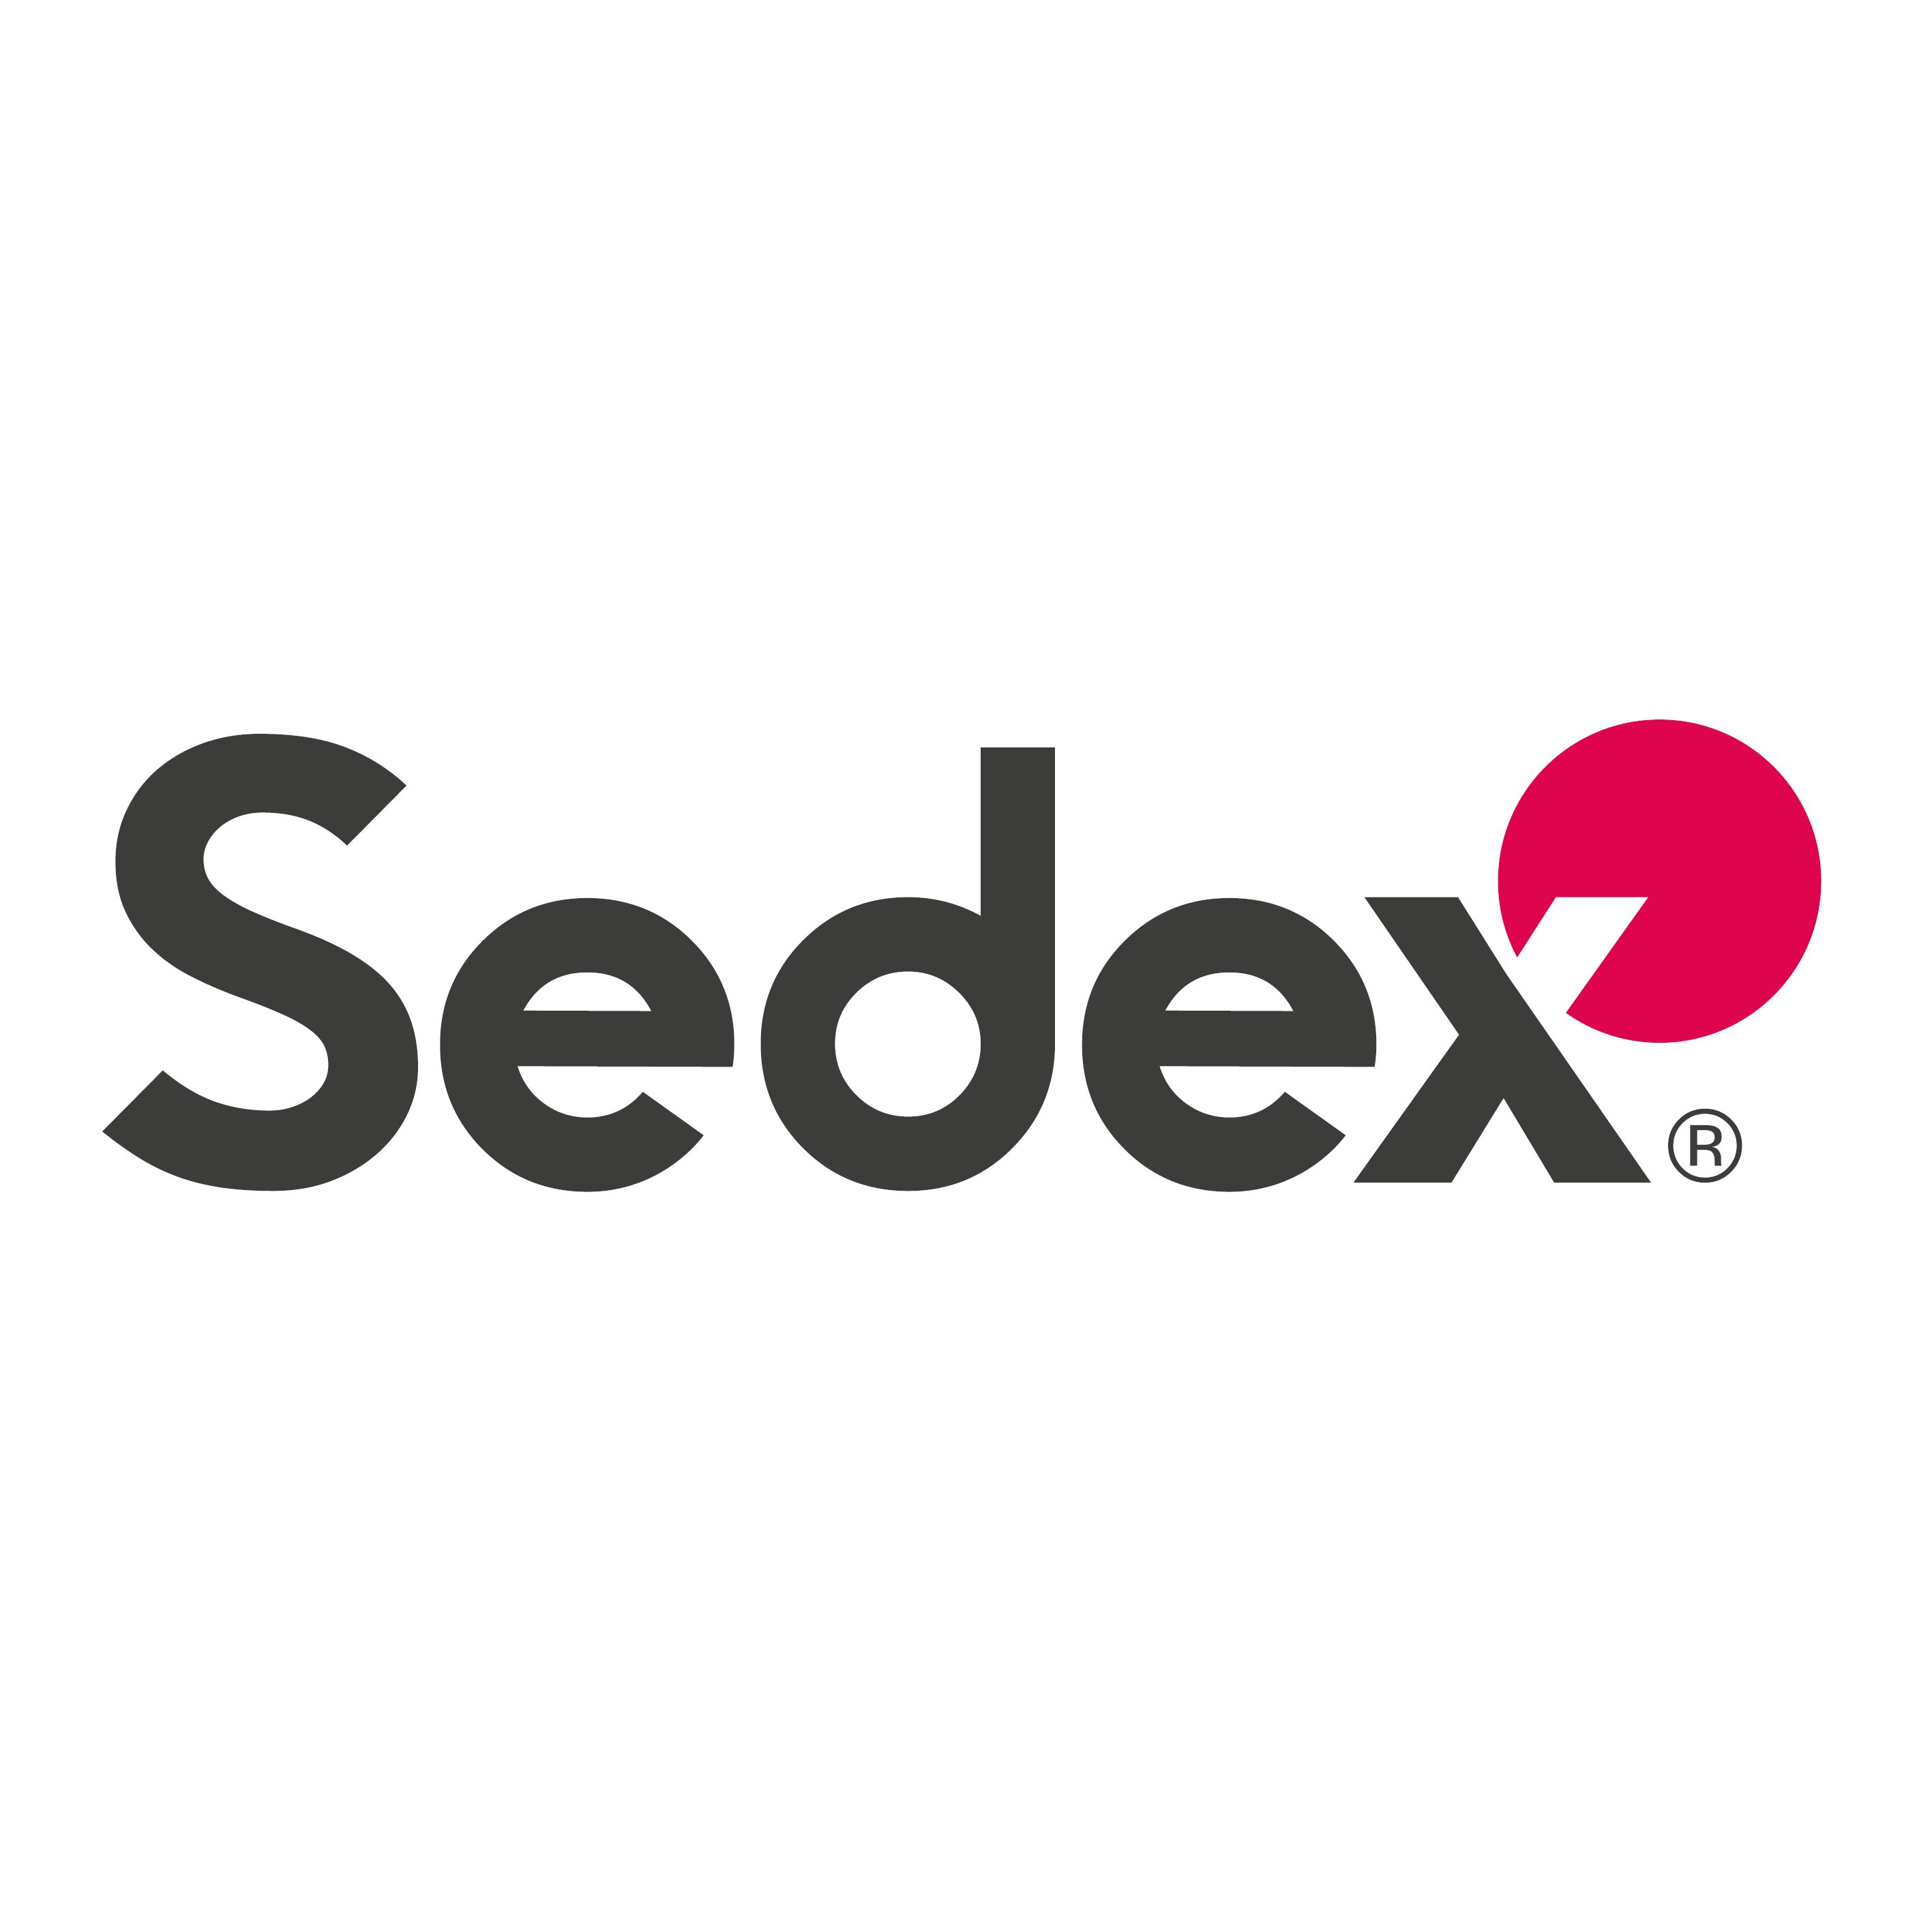  Fortary kitchenware is about to obtain SEDEX certification